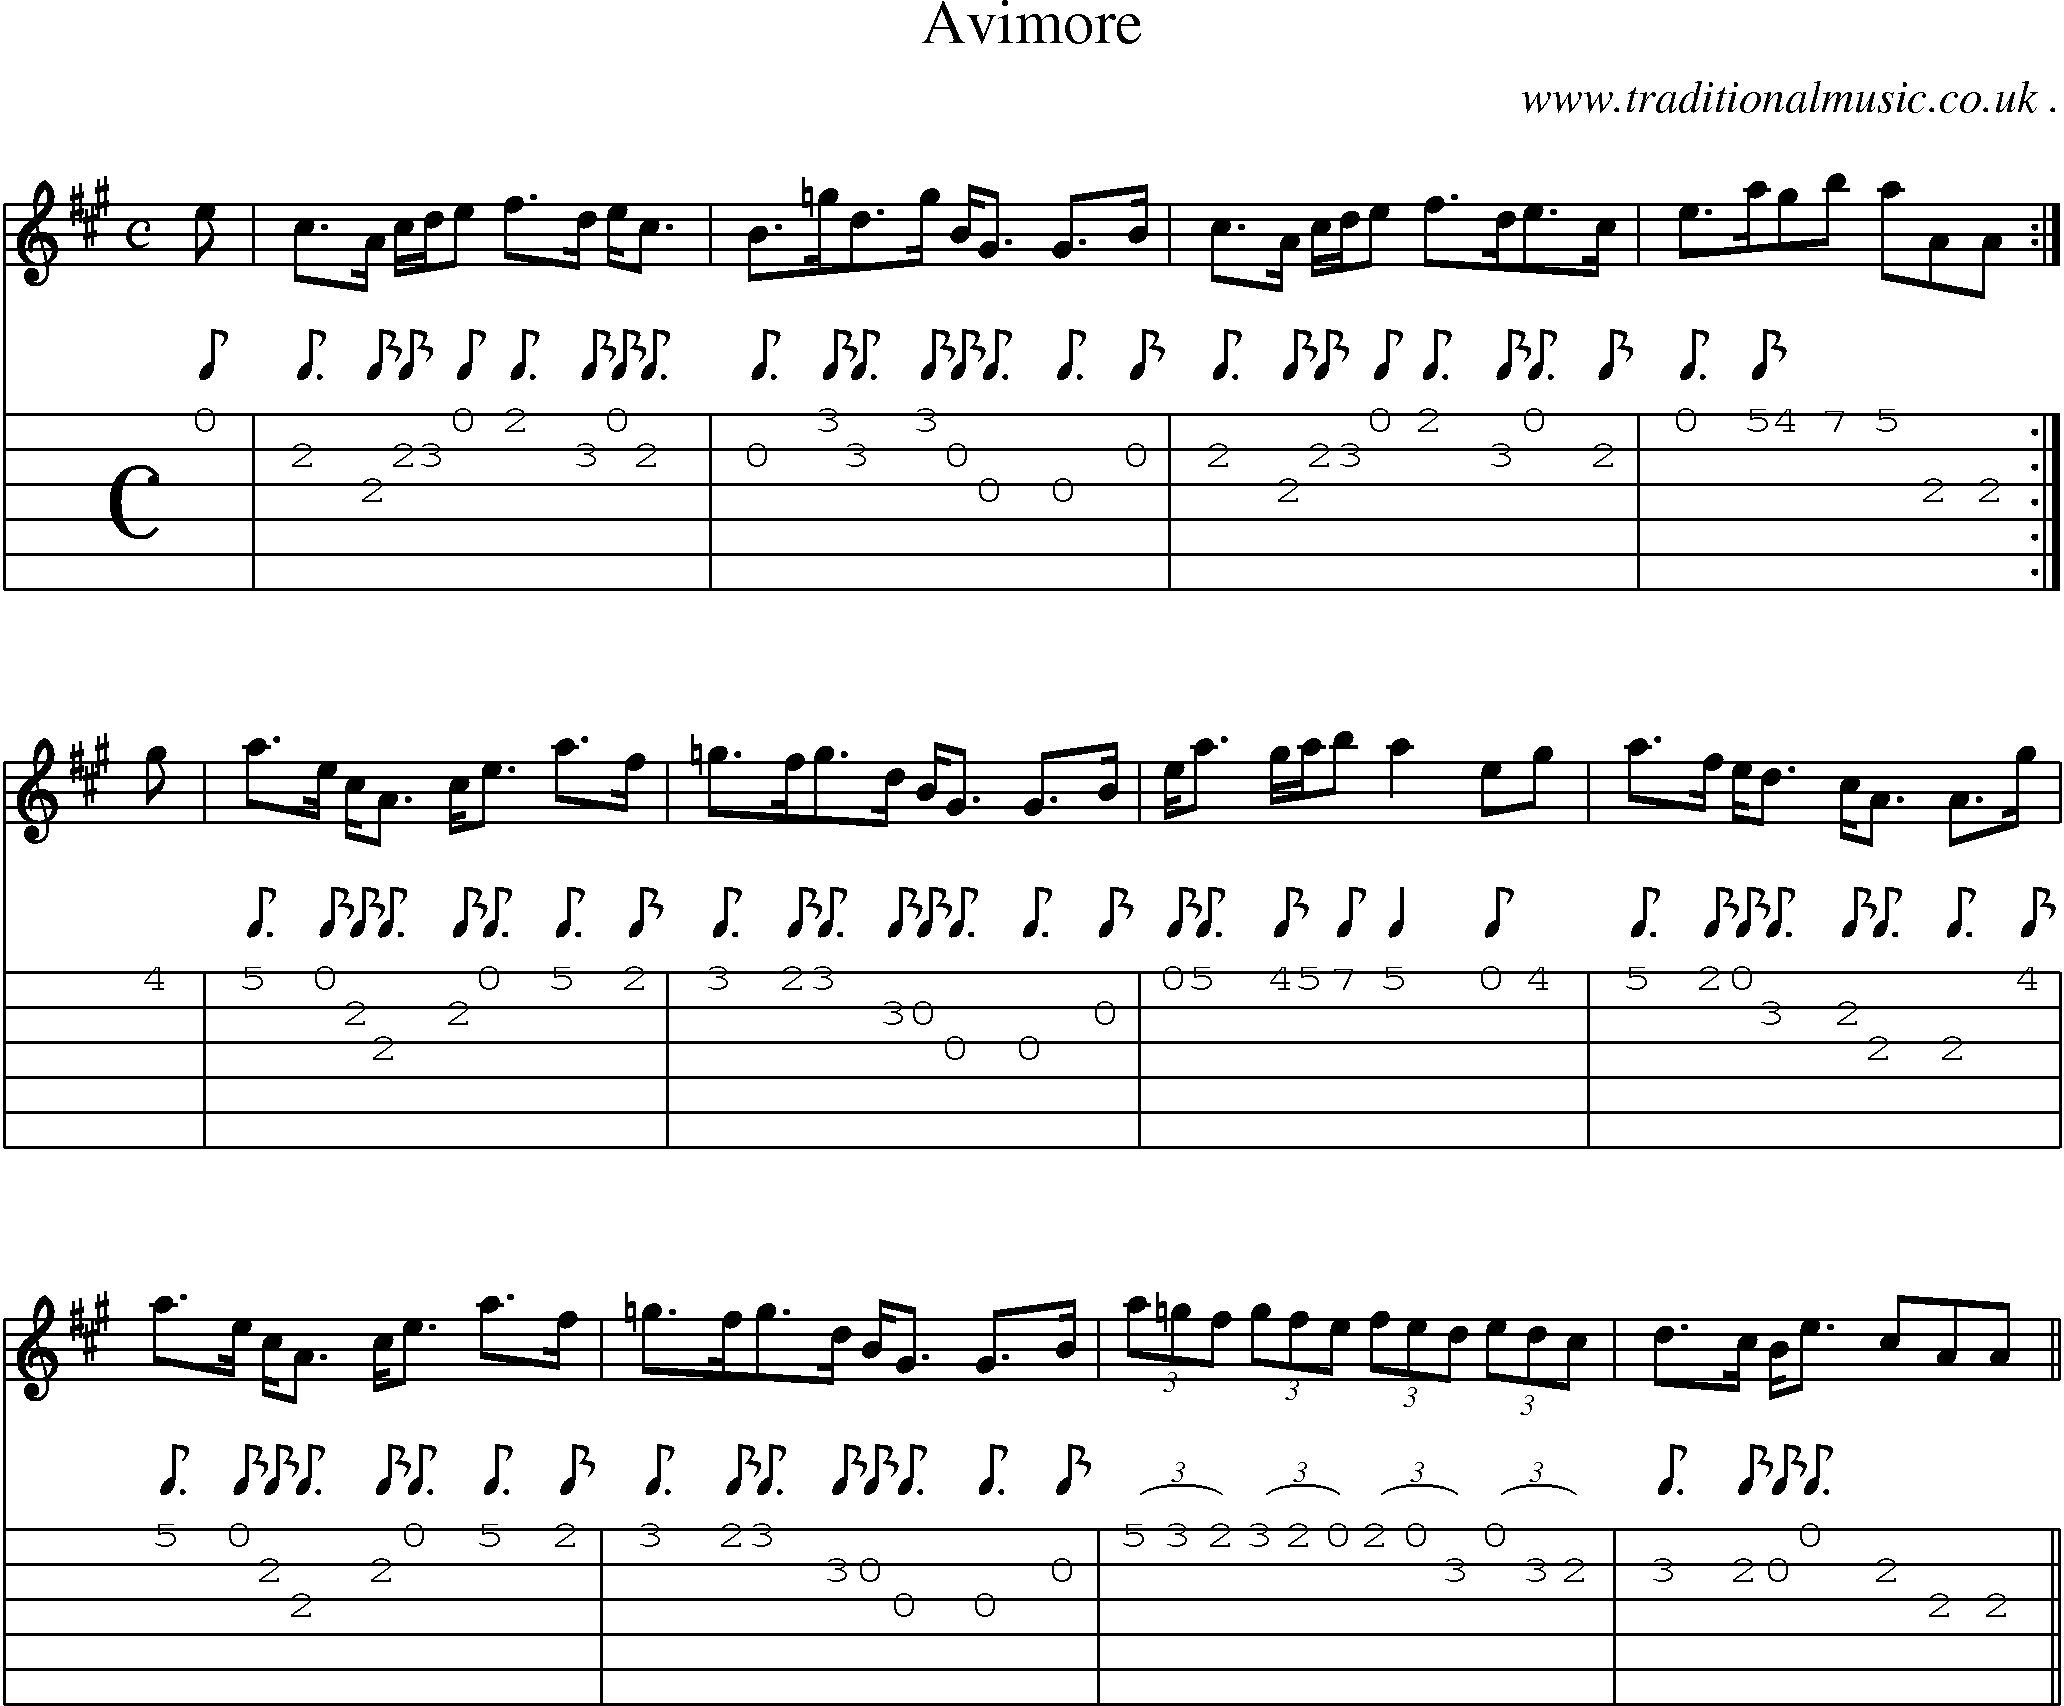 Sheet-music  score, Chords and Guitar Tabs for Avimore